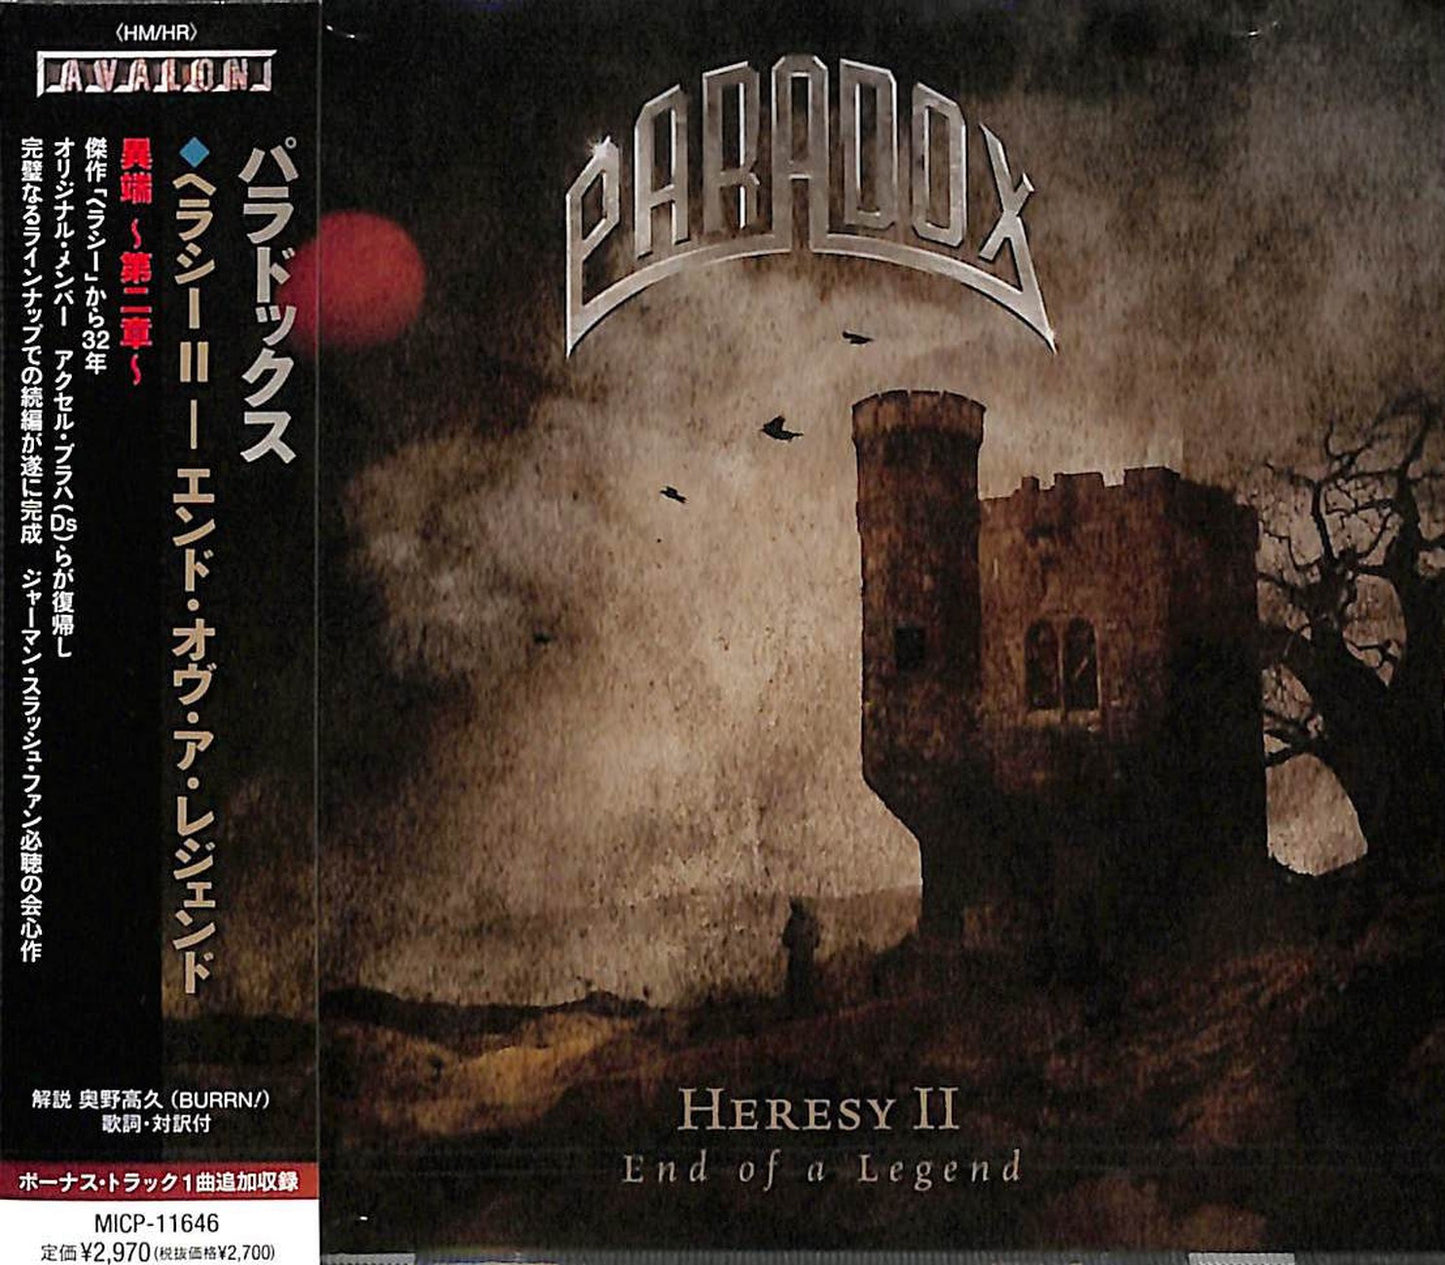 Paradox - Heresy 2: End Of A Legend - Japan CD